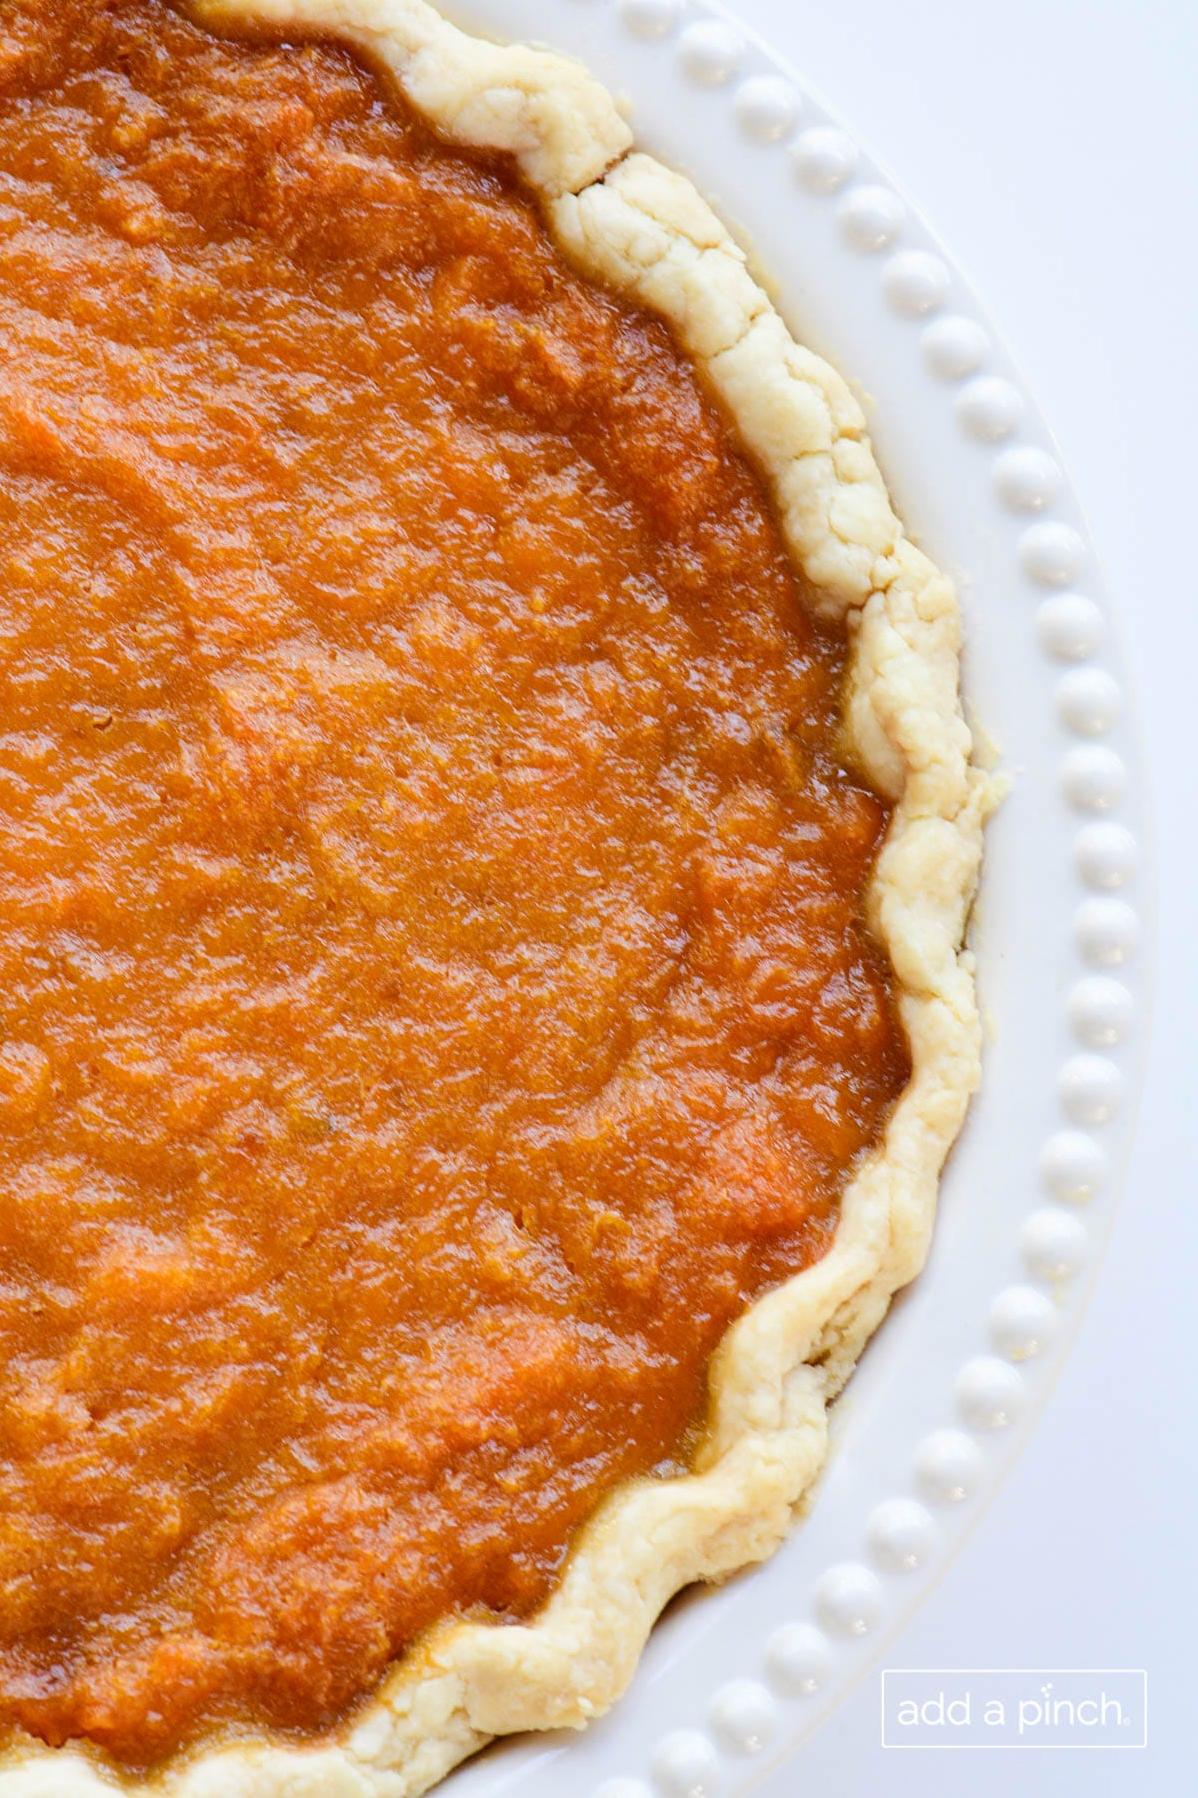  This pie is the perfect end to any meal, trust me!